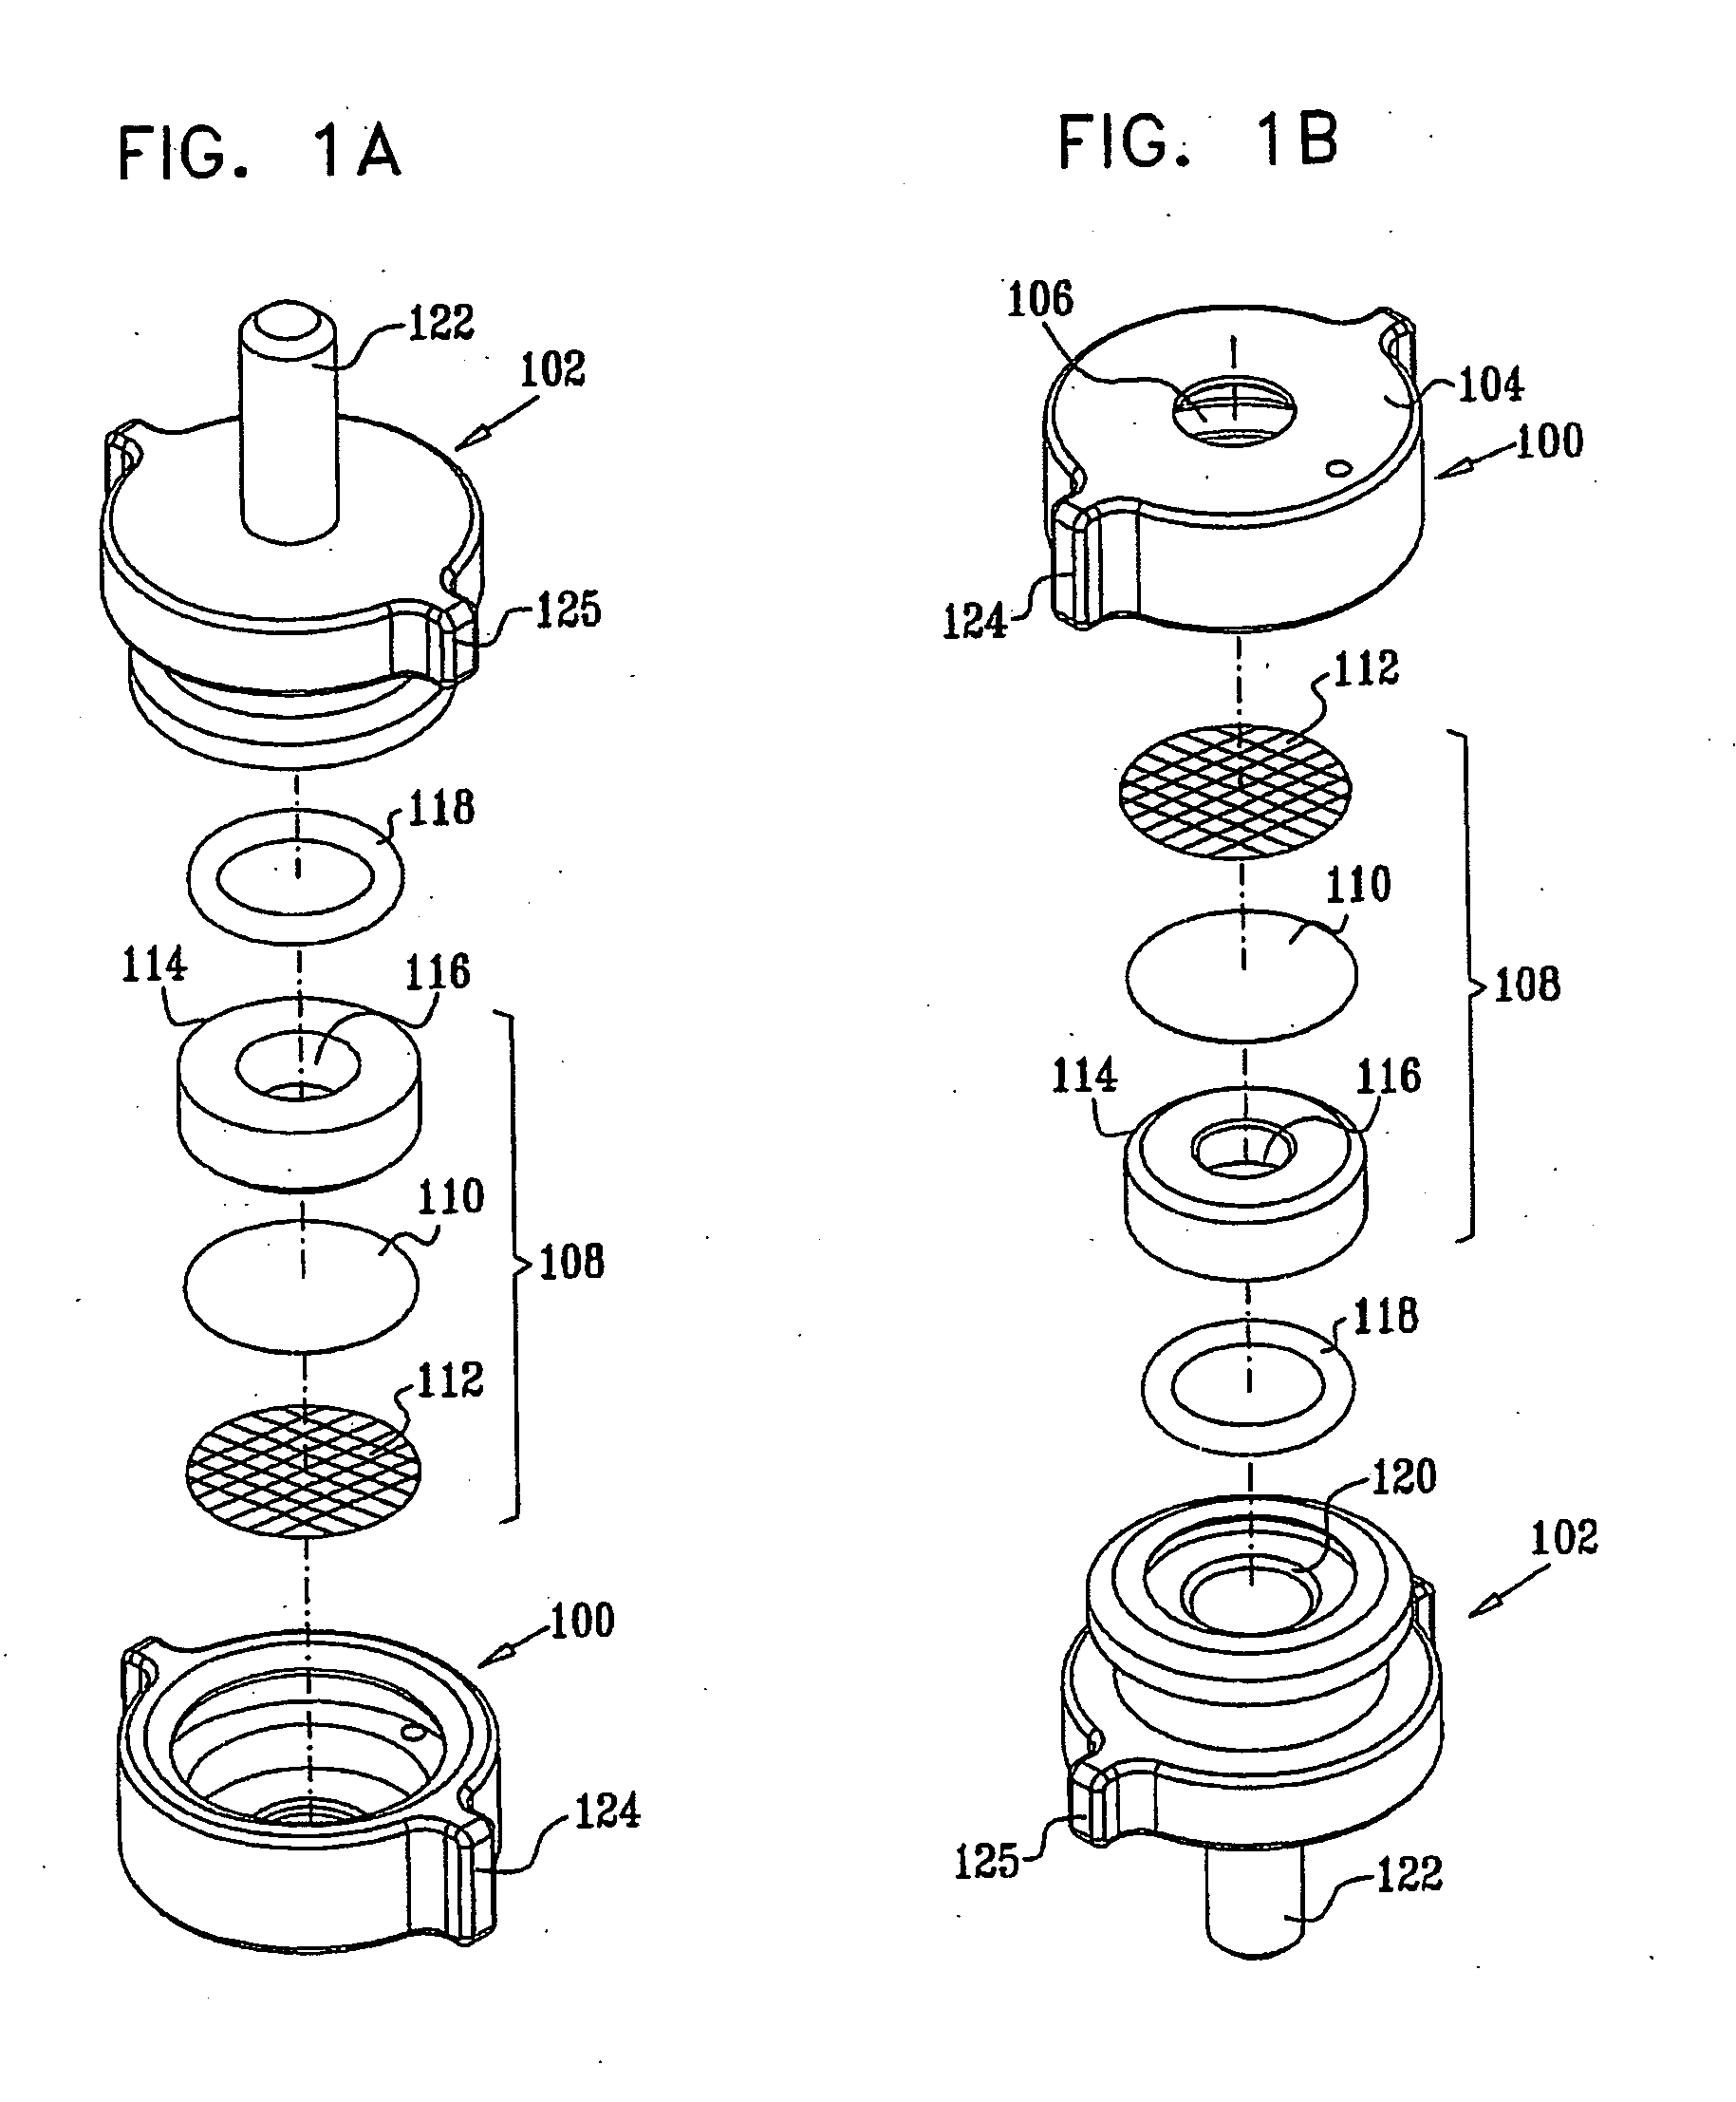 Methods for sem inspection of fluid containing samples